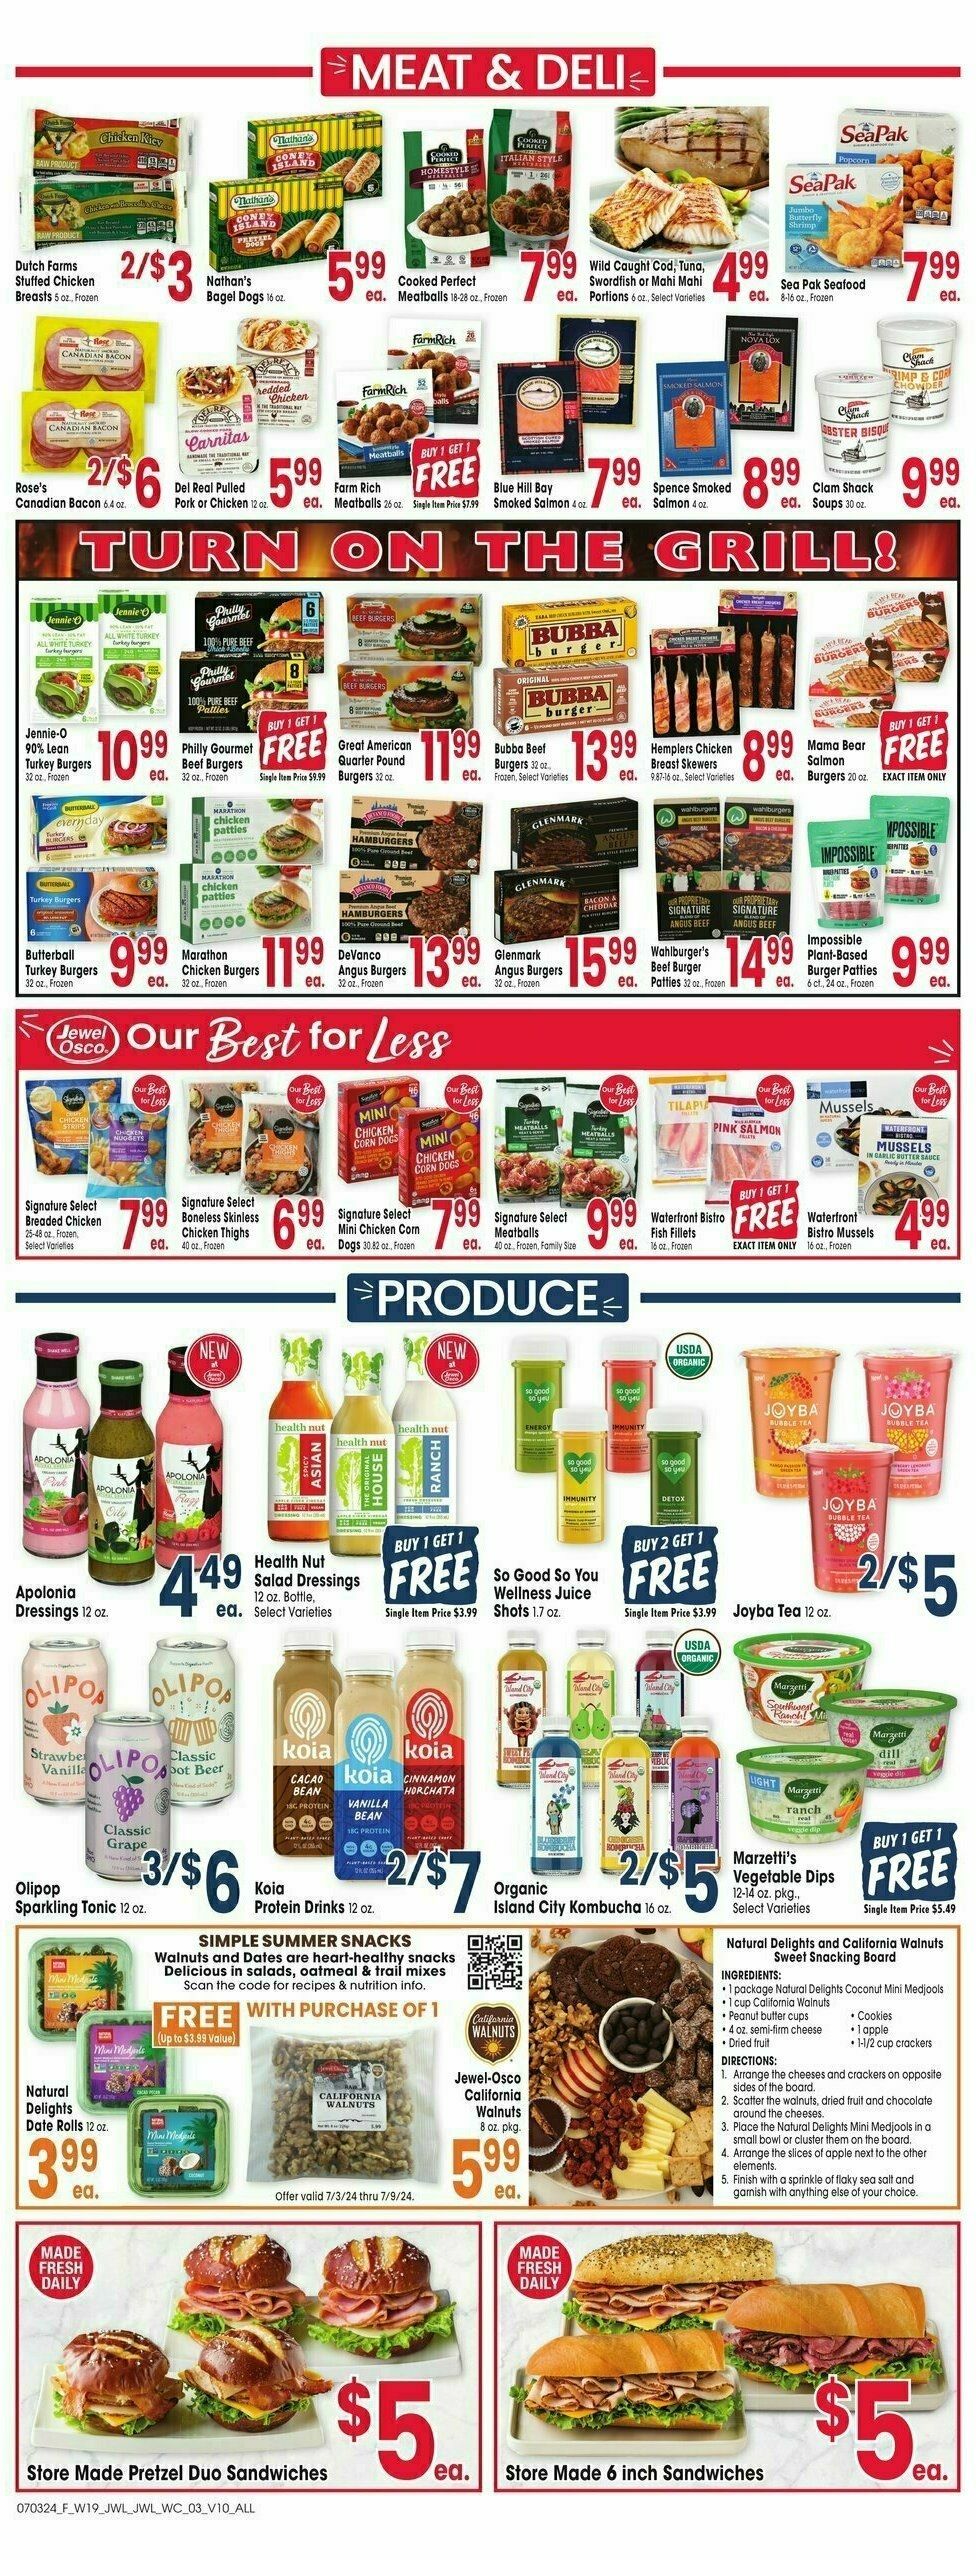 Jewel Osco Weekly Ad from July 3